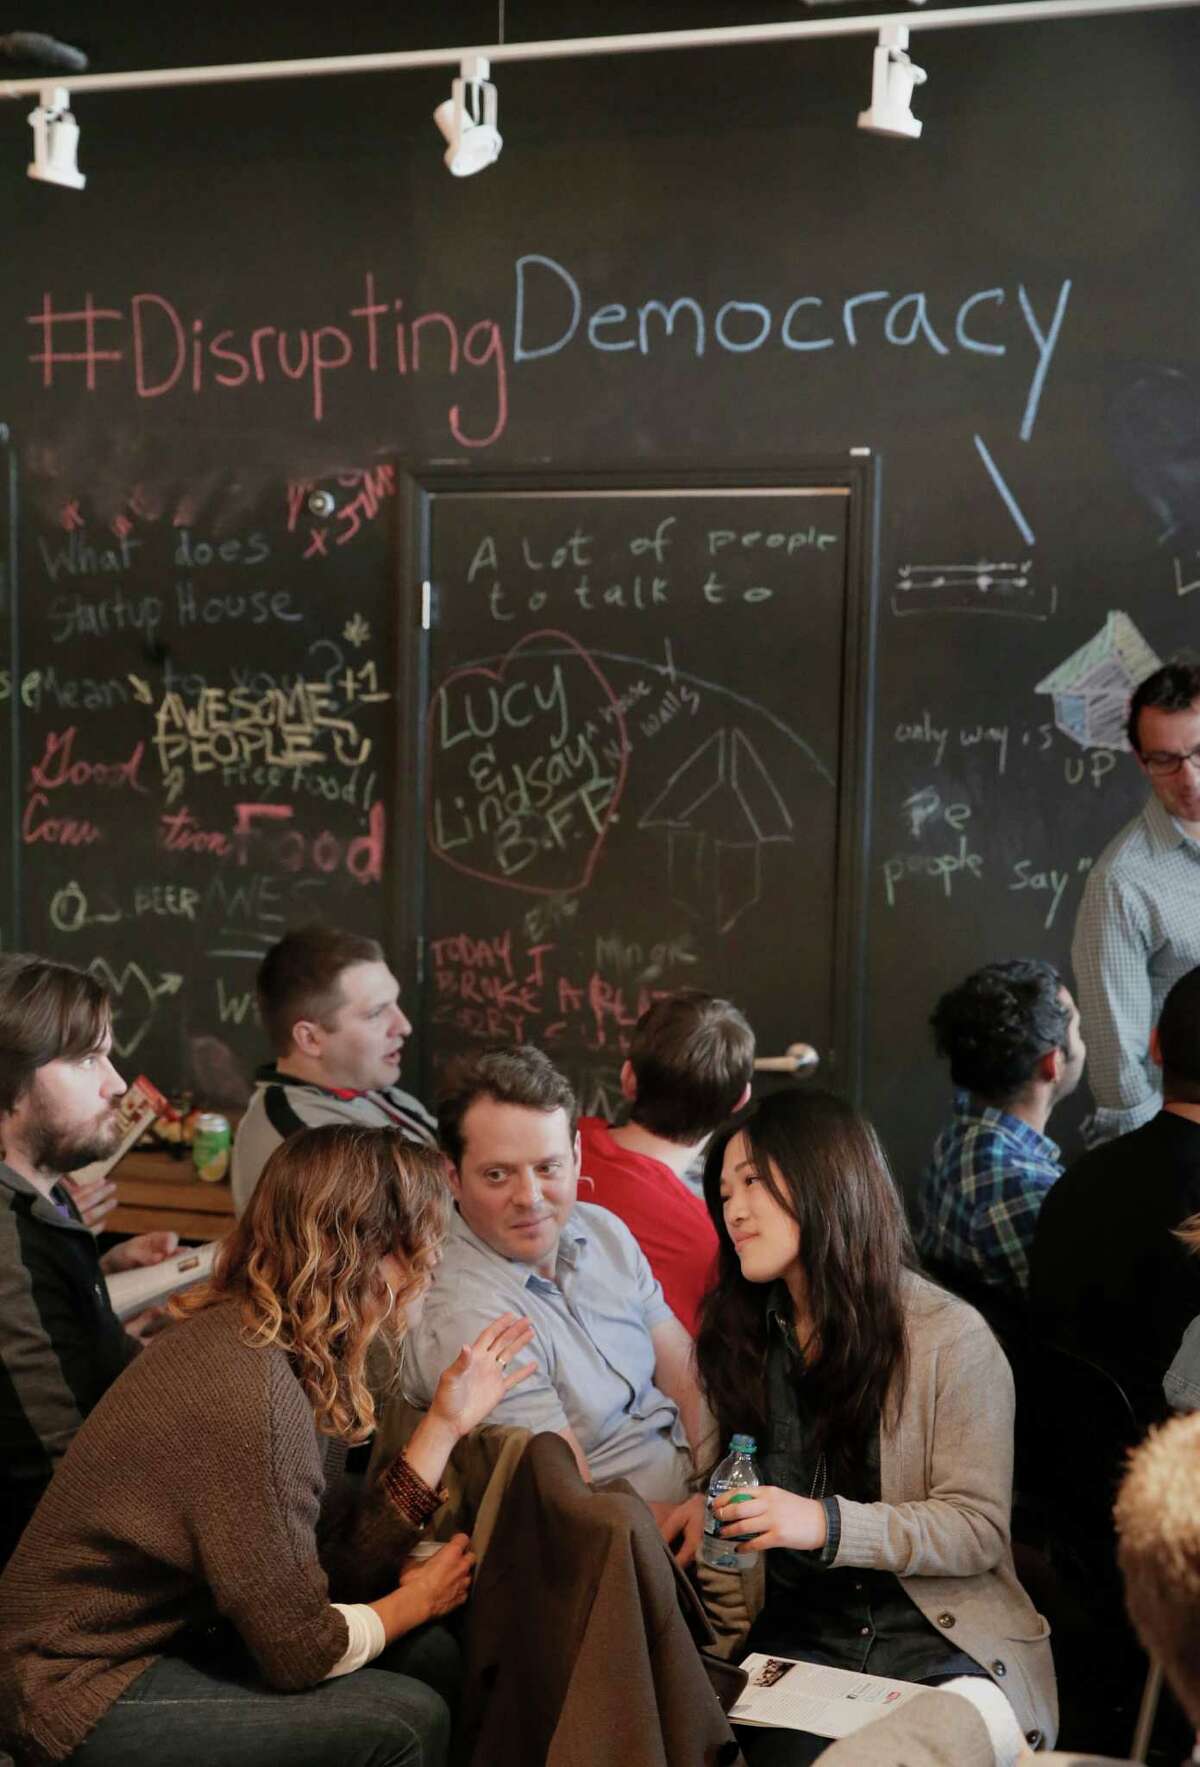 Beth Bounds, Francis Djabri and Jennifer Julian talks while waiting for Presidential candidate Senator Rand Paul, (R-KY) to participate in the "Disrupting Democracy" speaker series at the Startuphouse which was hosted by Lincoln Labs and Brigade in San Francisco, Calif., on Sat. May 9, 2015.